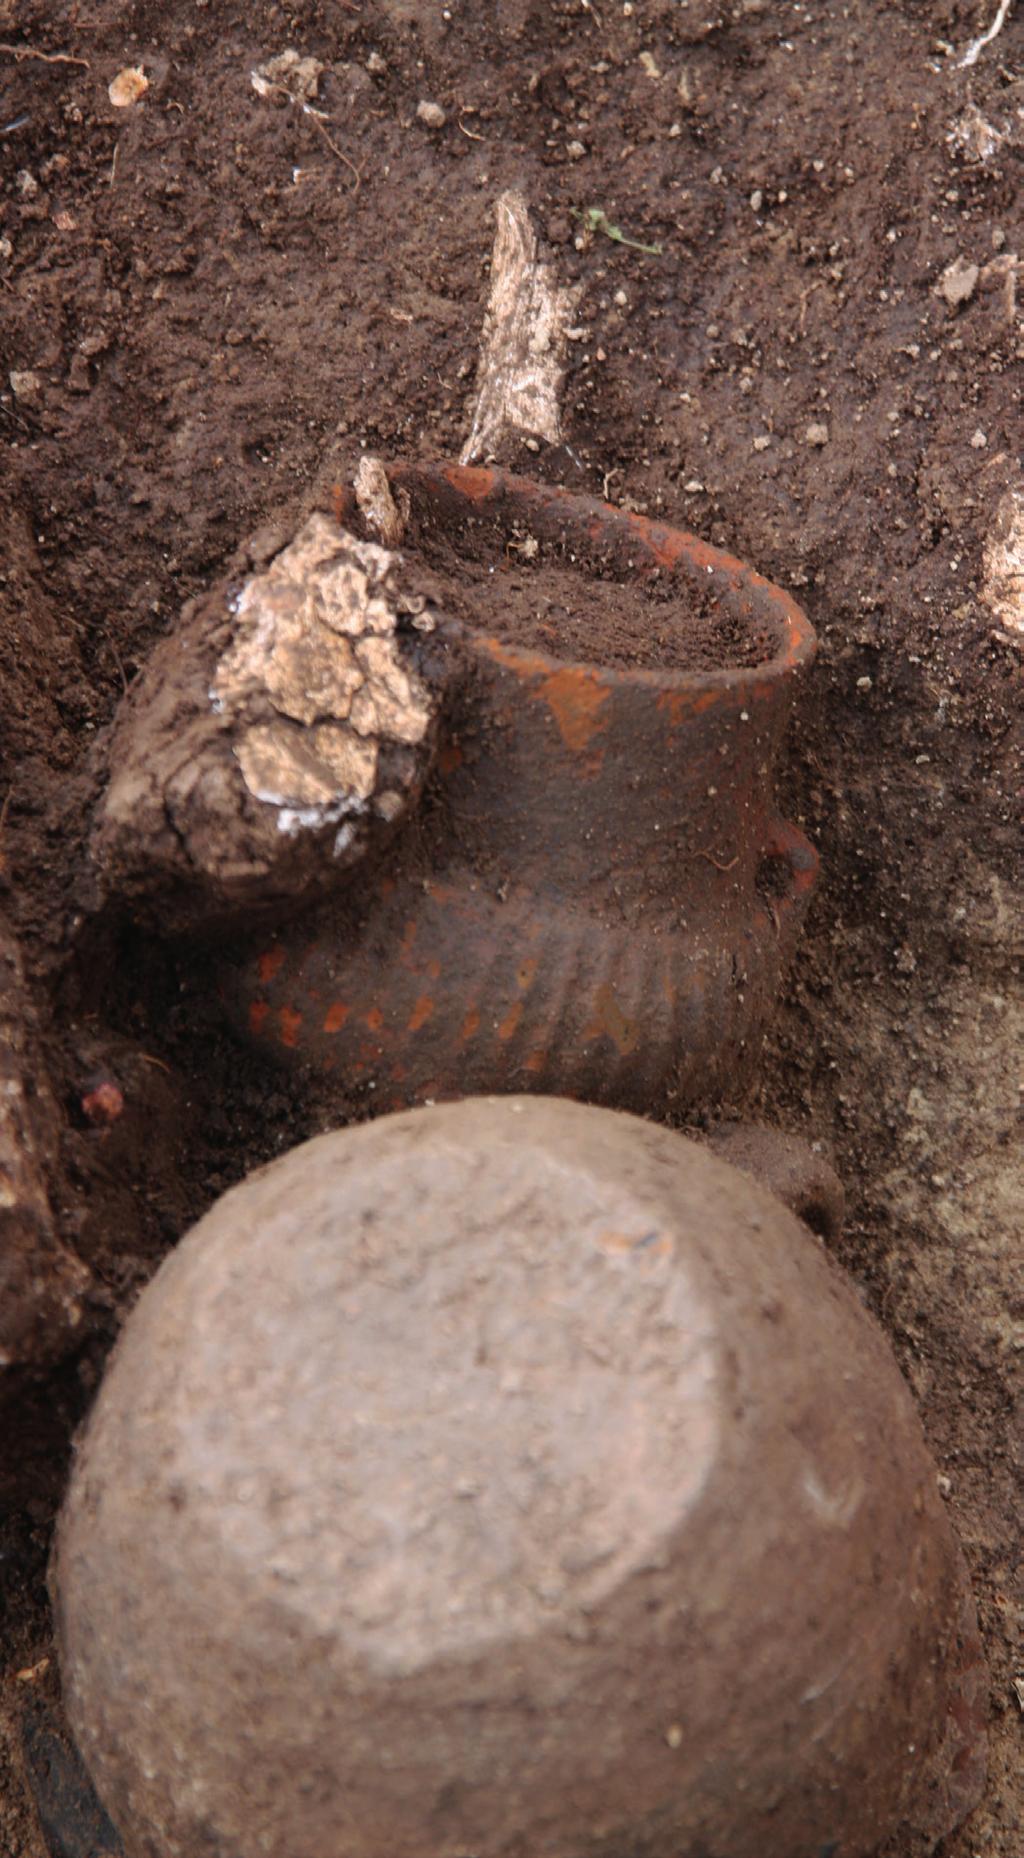 6: In many cases it was possible to observe a close connection between secondarily burnt vessels and the human remains at the Jobbágyi-Hosszú-dűlő cemetery Similarly to the ceramic objects, bronze